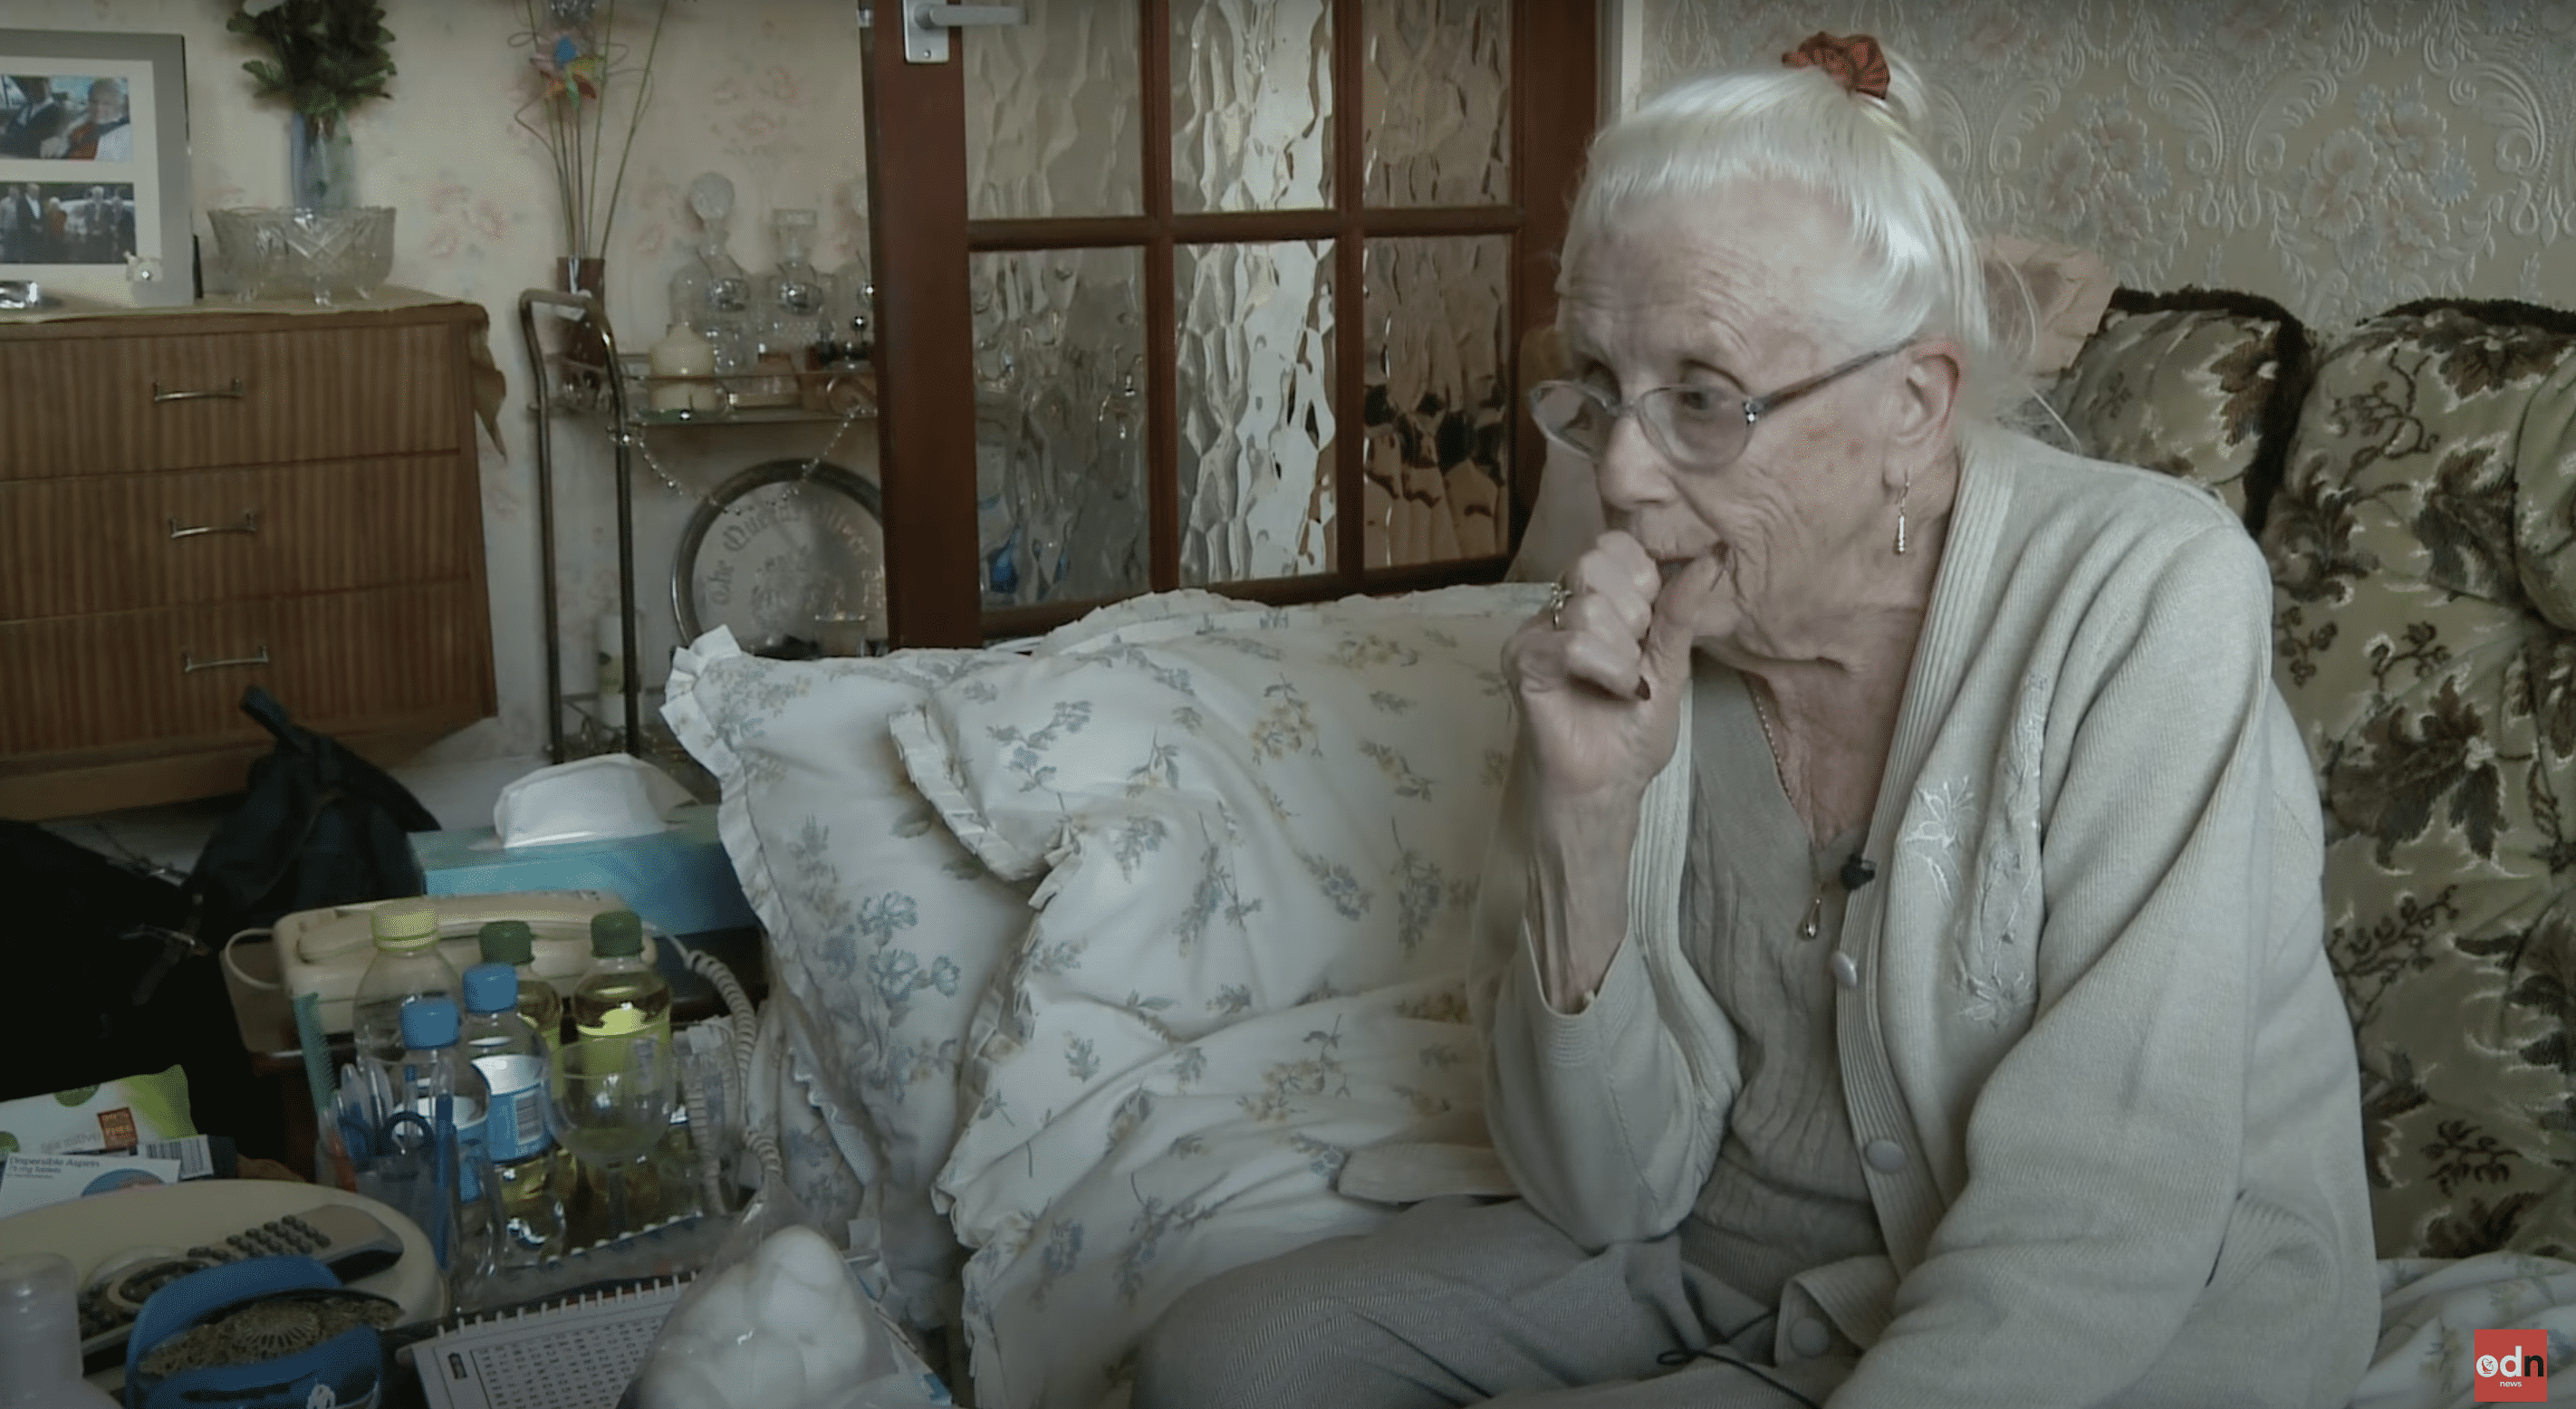 Doreen Mann, the 87-year-old pensioner from Essex. | Source: YouTube.com/On Demand News